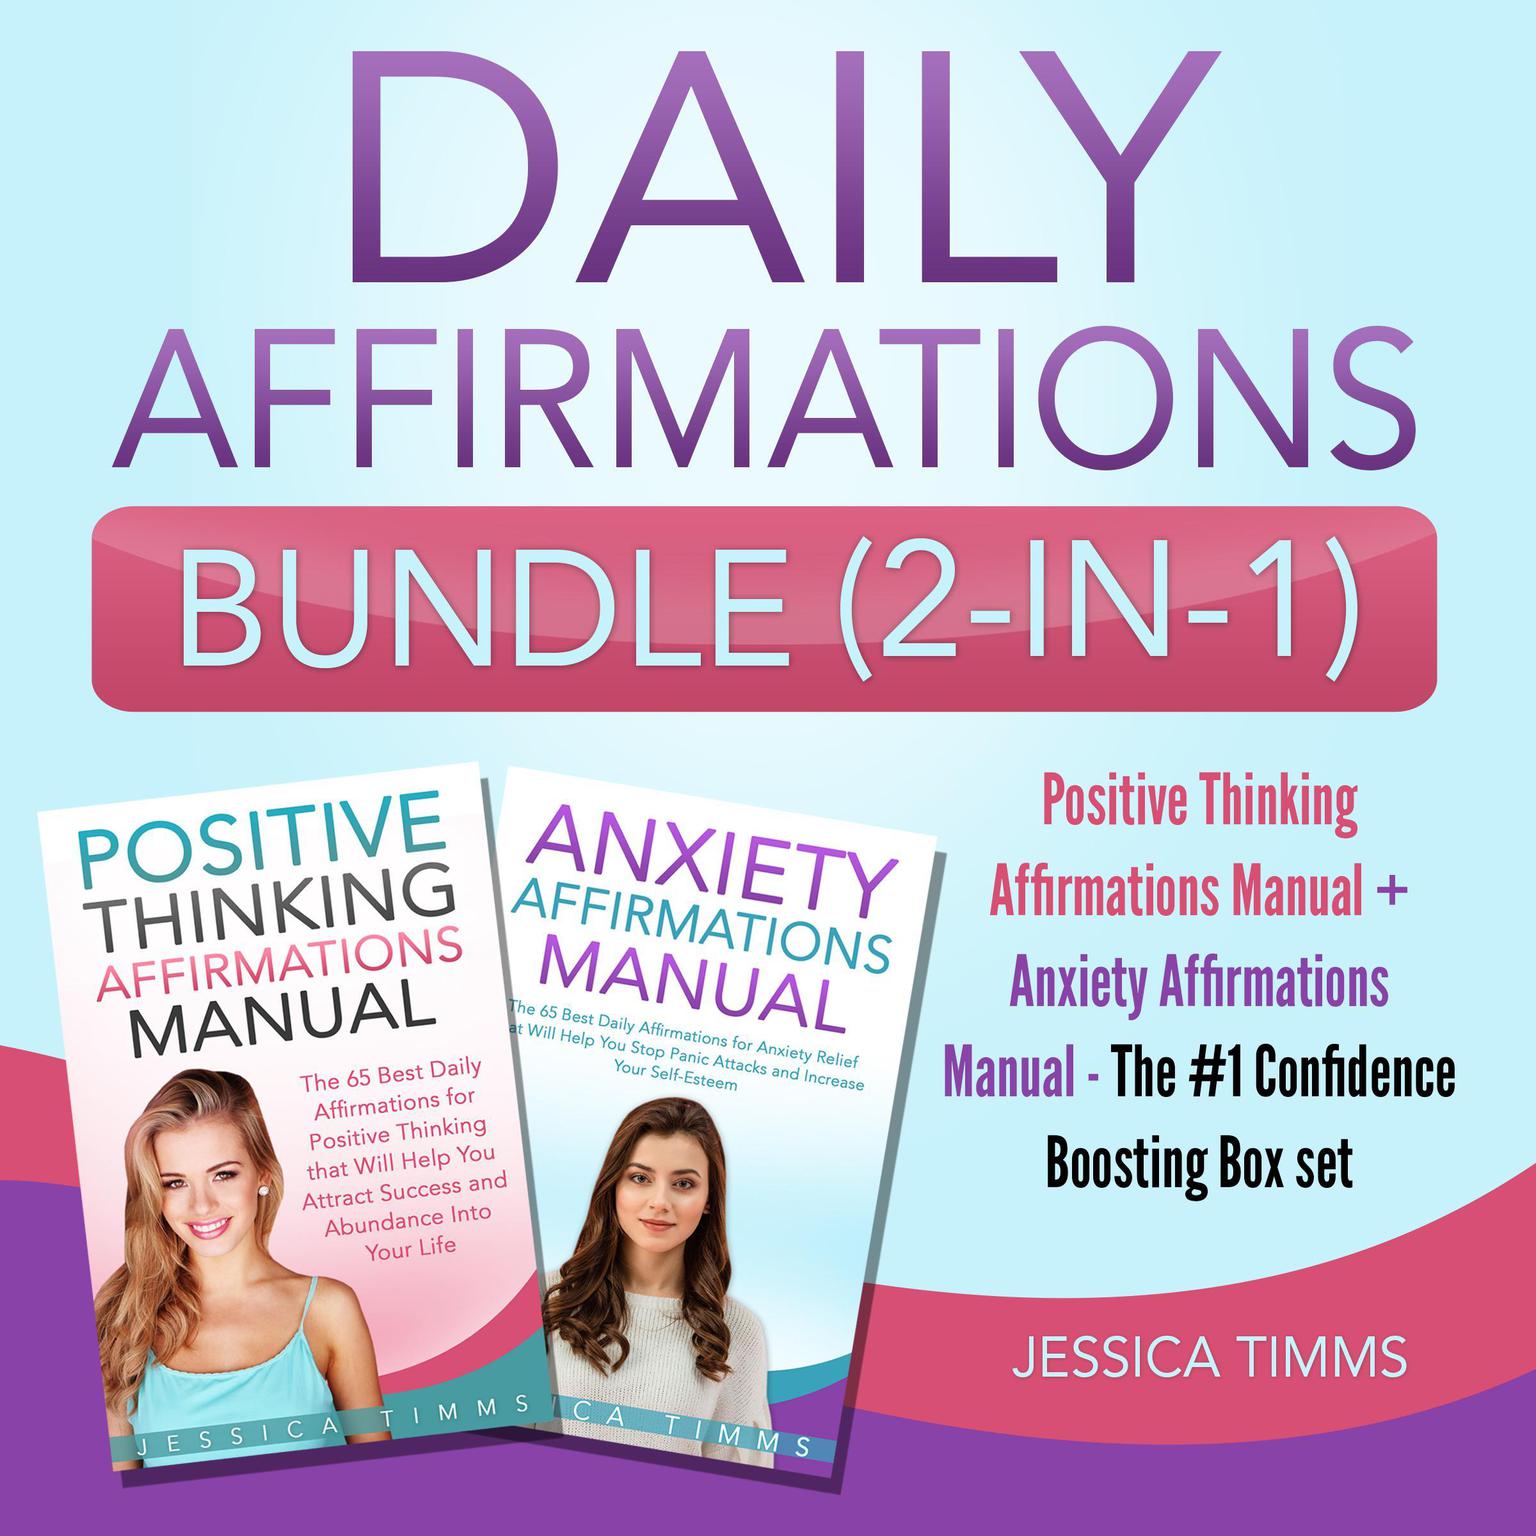 Daily Affirmations Bundle (2-in-1): Positive Thinking Affirmations Manual + Anxiety Affirmations Manual - The #1 Confidence Boosting Box set Audiobook, by Jessica Timms